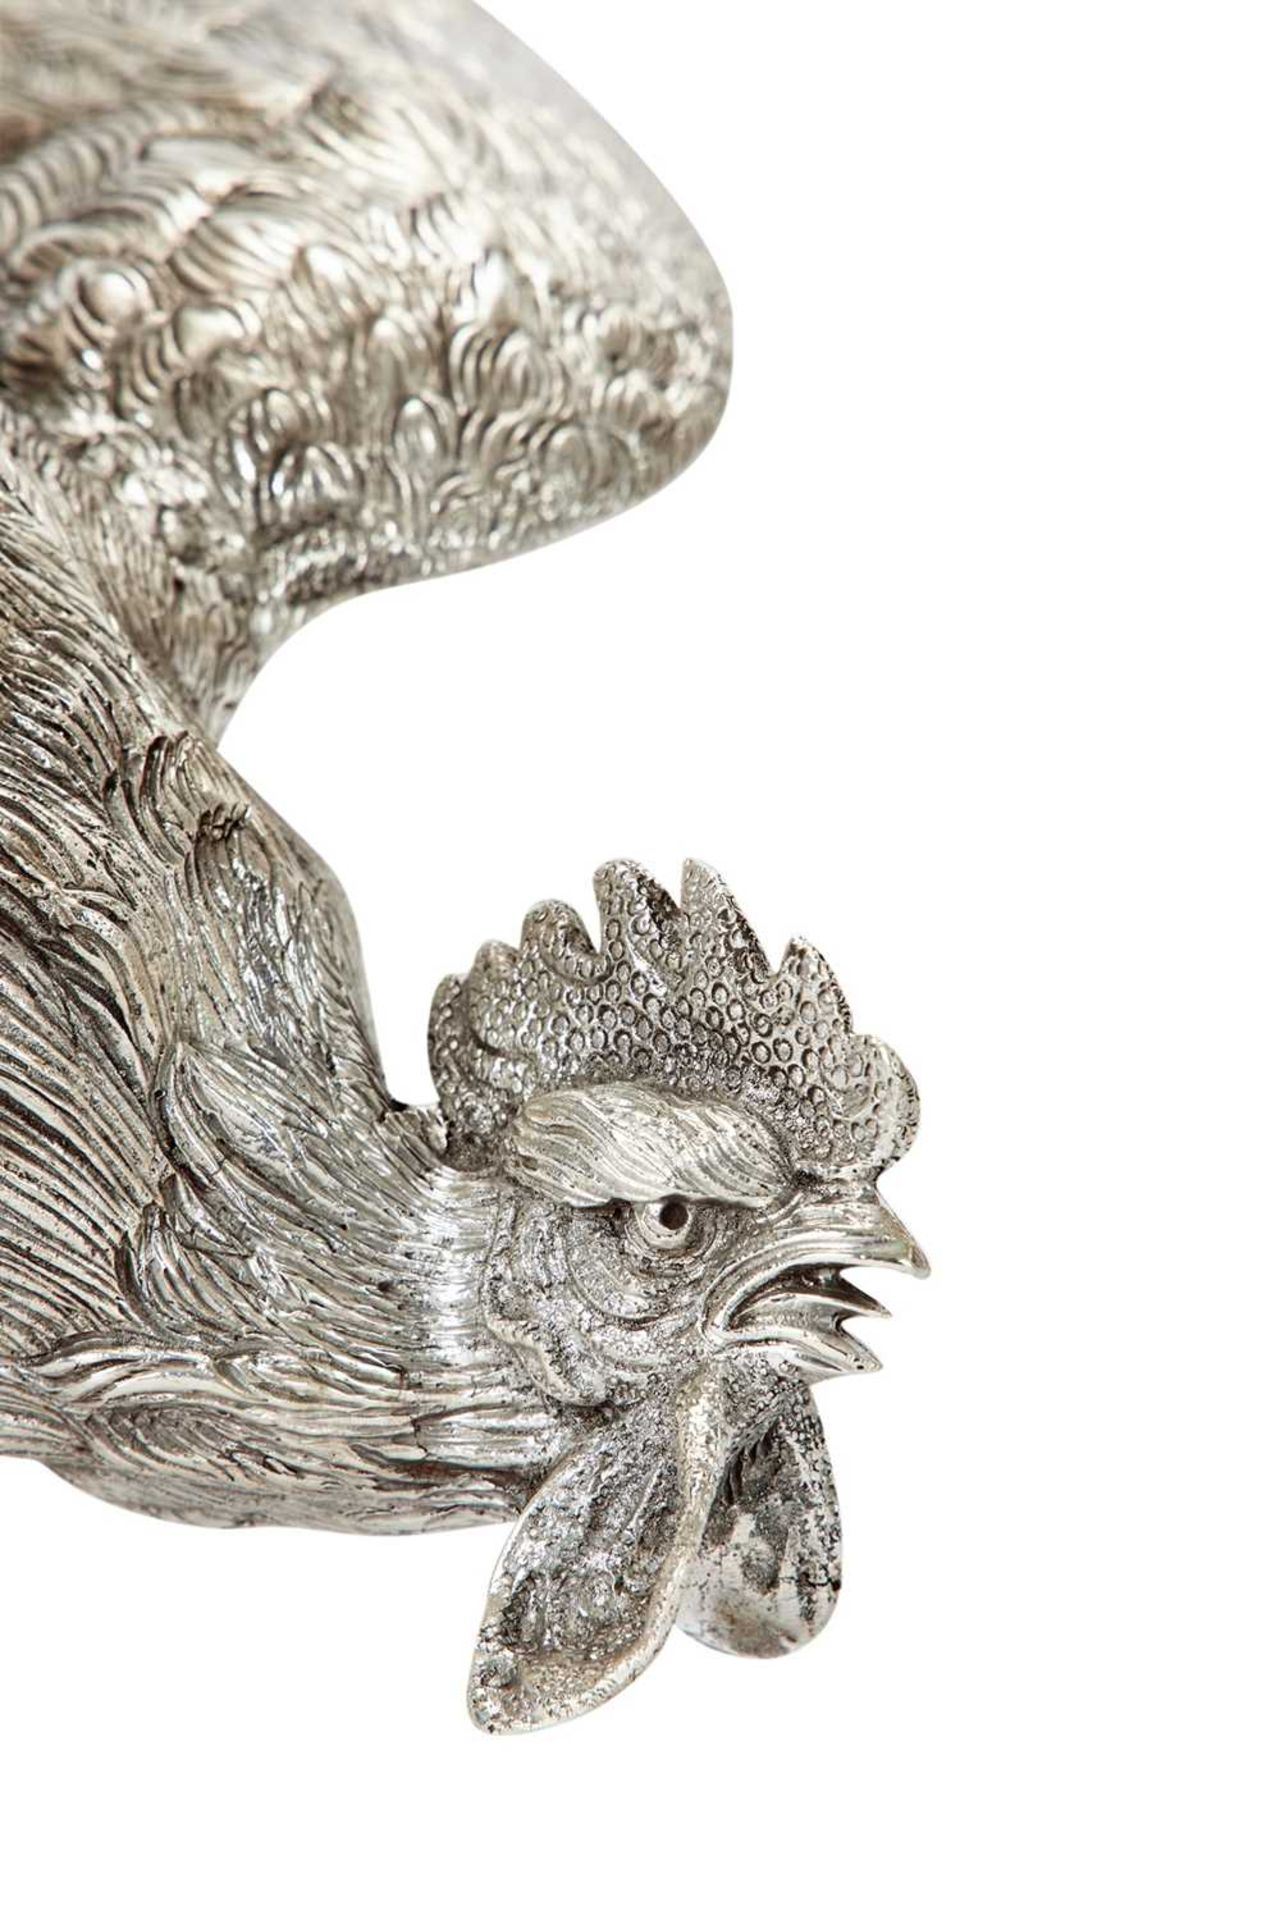 A LARGE PAIR OF STERLING SILVER FIGHTING COCKEREL TABLE ORNAMENTS BY CAMUSSO, PERU - Image 3 of 5